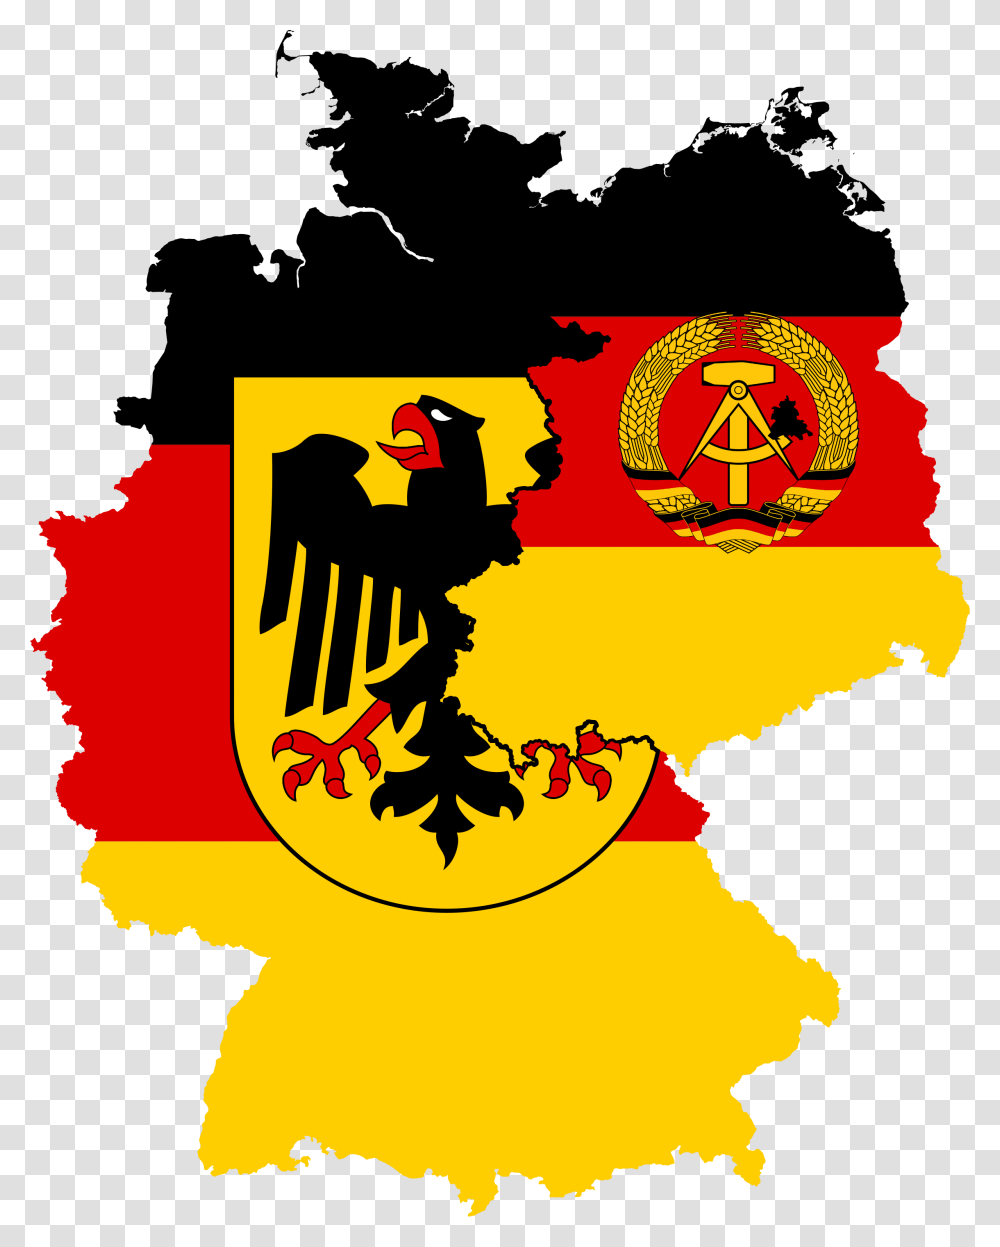 West Germany East Germany Flag Map, Poster, Advertisement, Logo Transparent Png